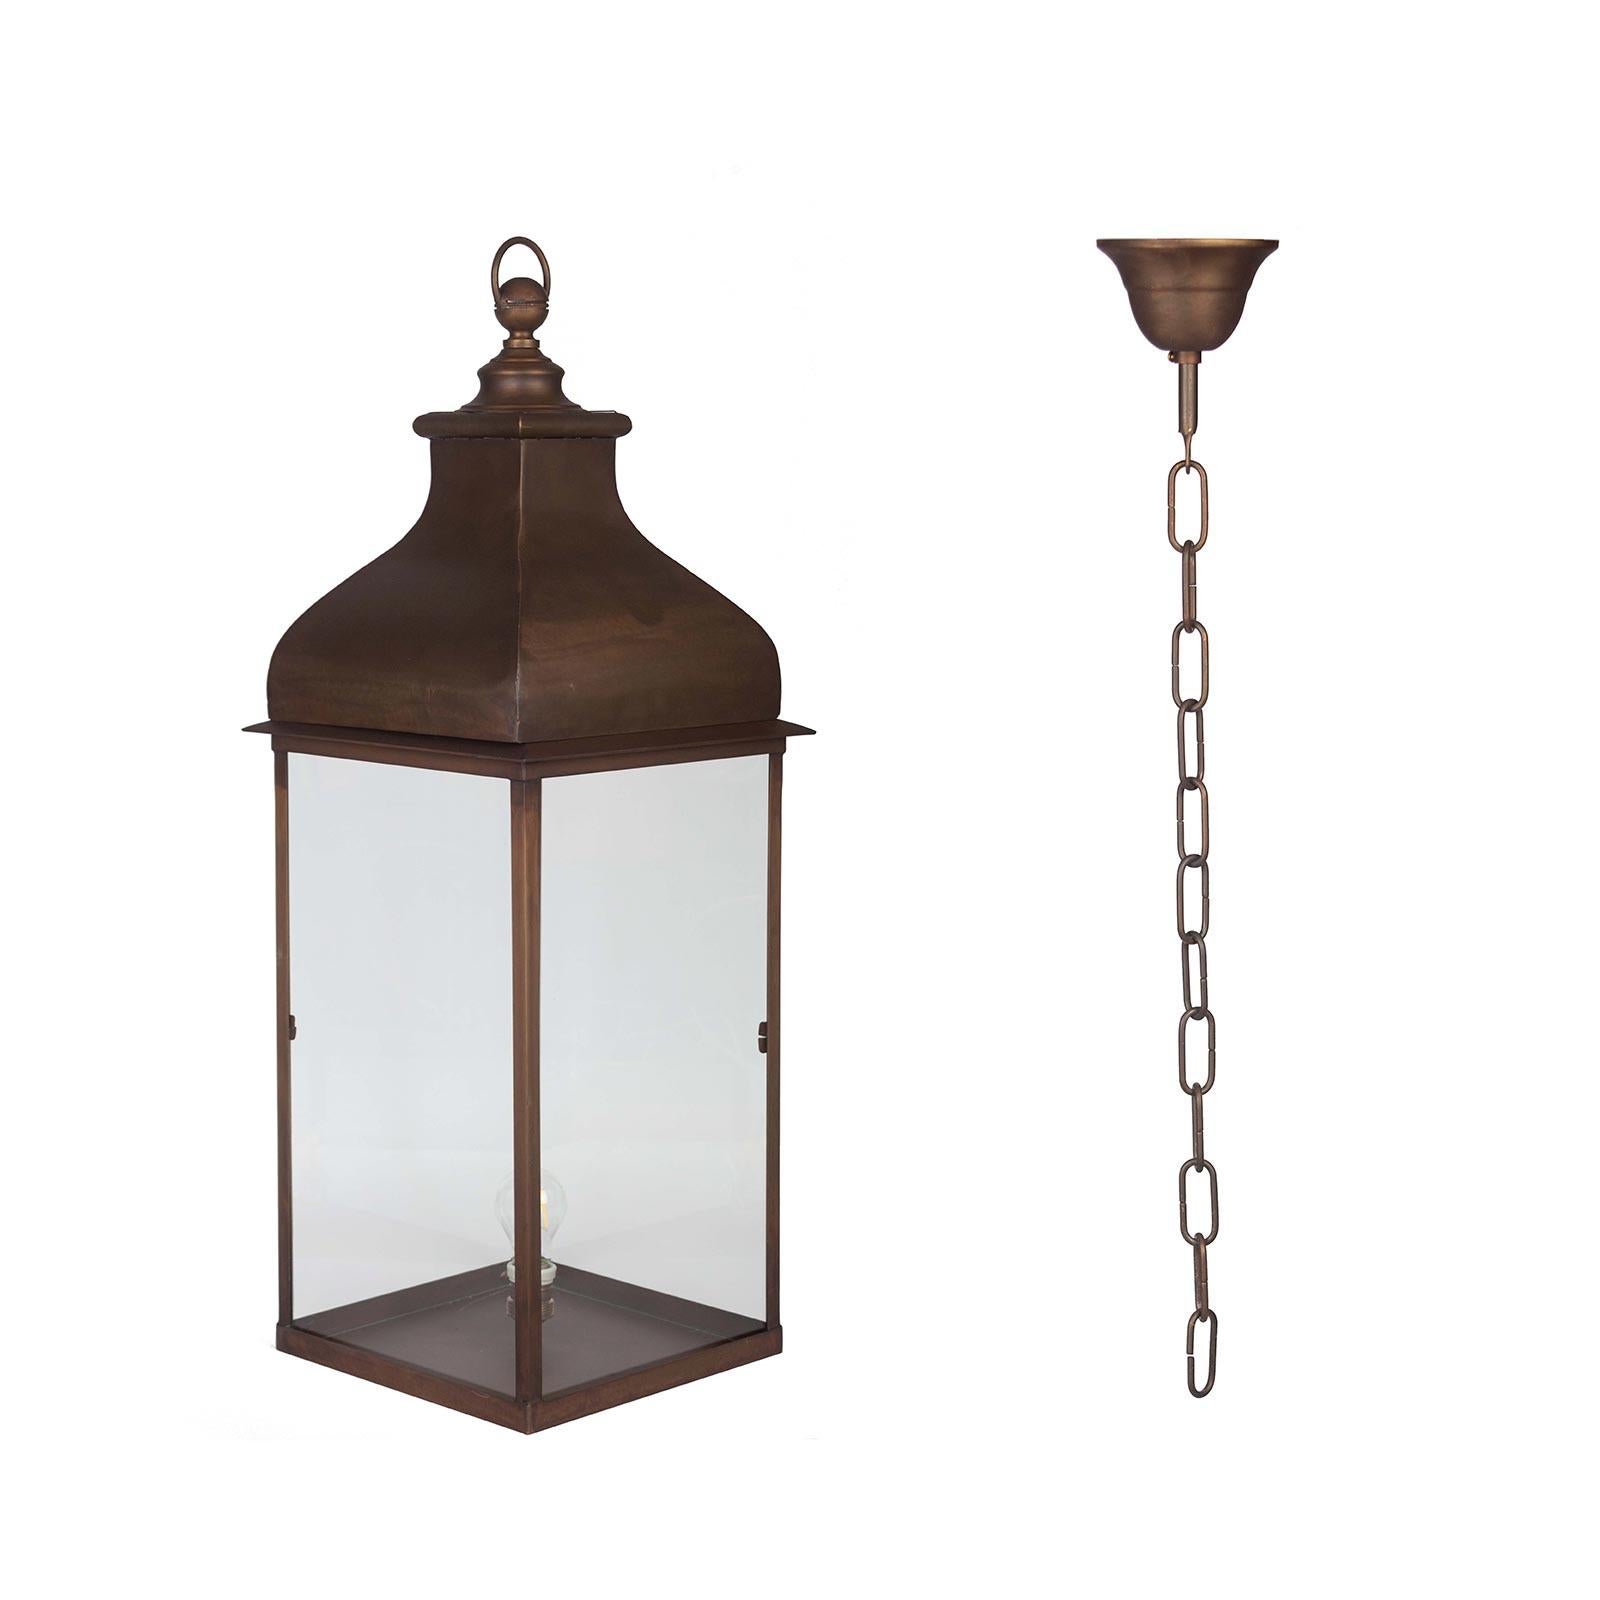 Description

Ilaria is the outdoor lantern in burnished brass with a square base, ideal for decorating entrances and facades.

Simple lines give space to the characteristic burnished shades of brass and embellish the room.

The lantern can be placed